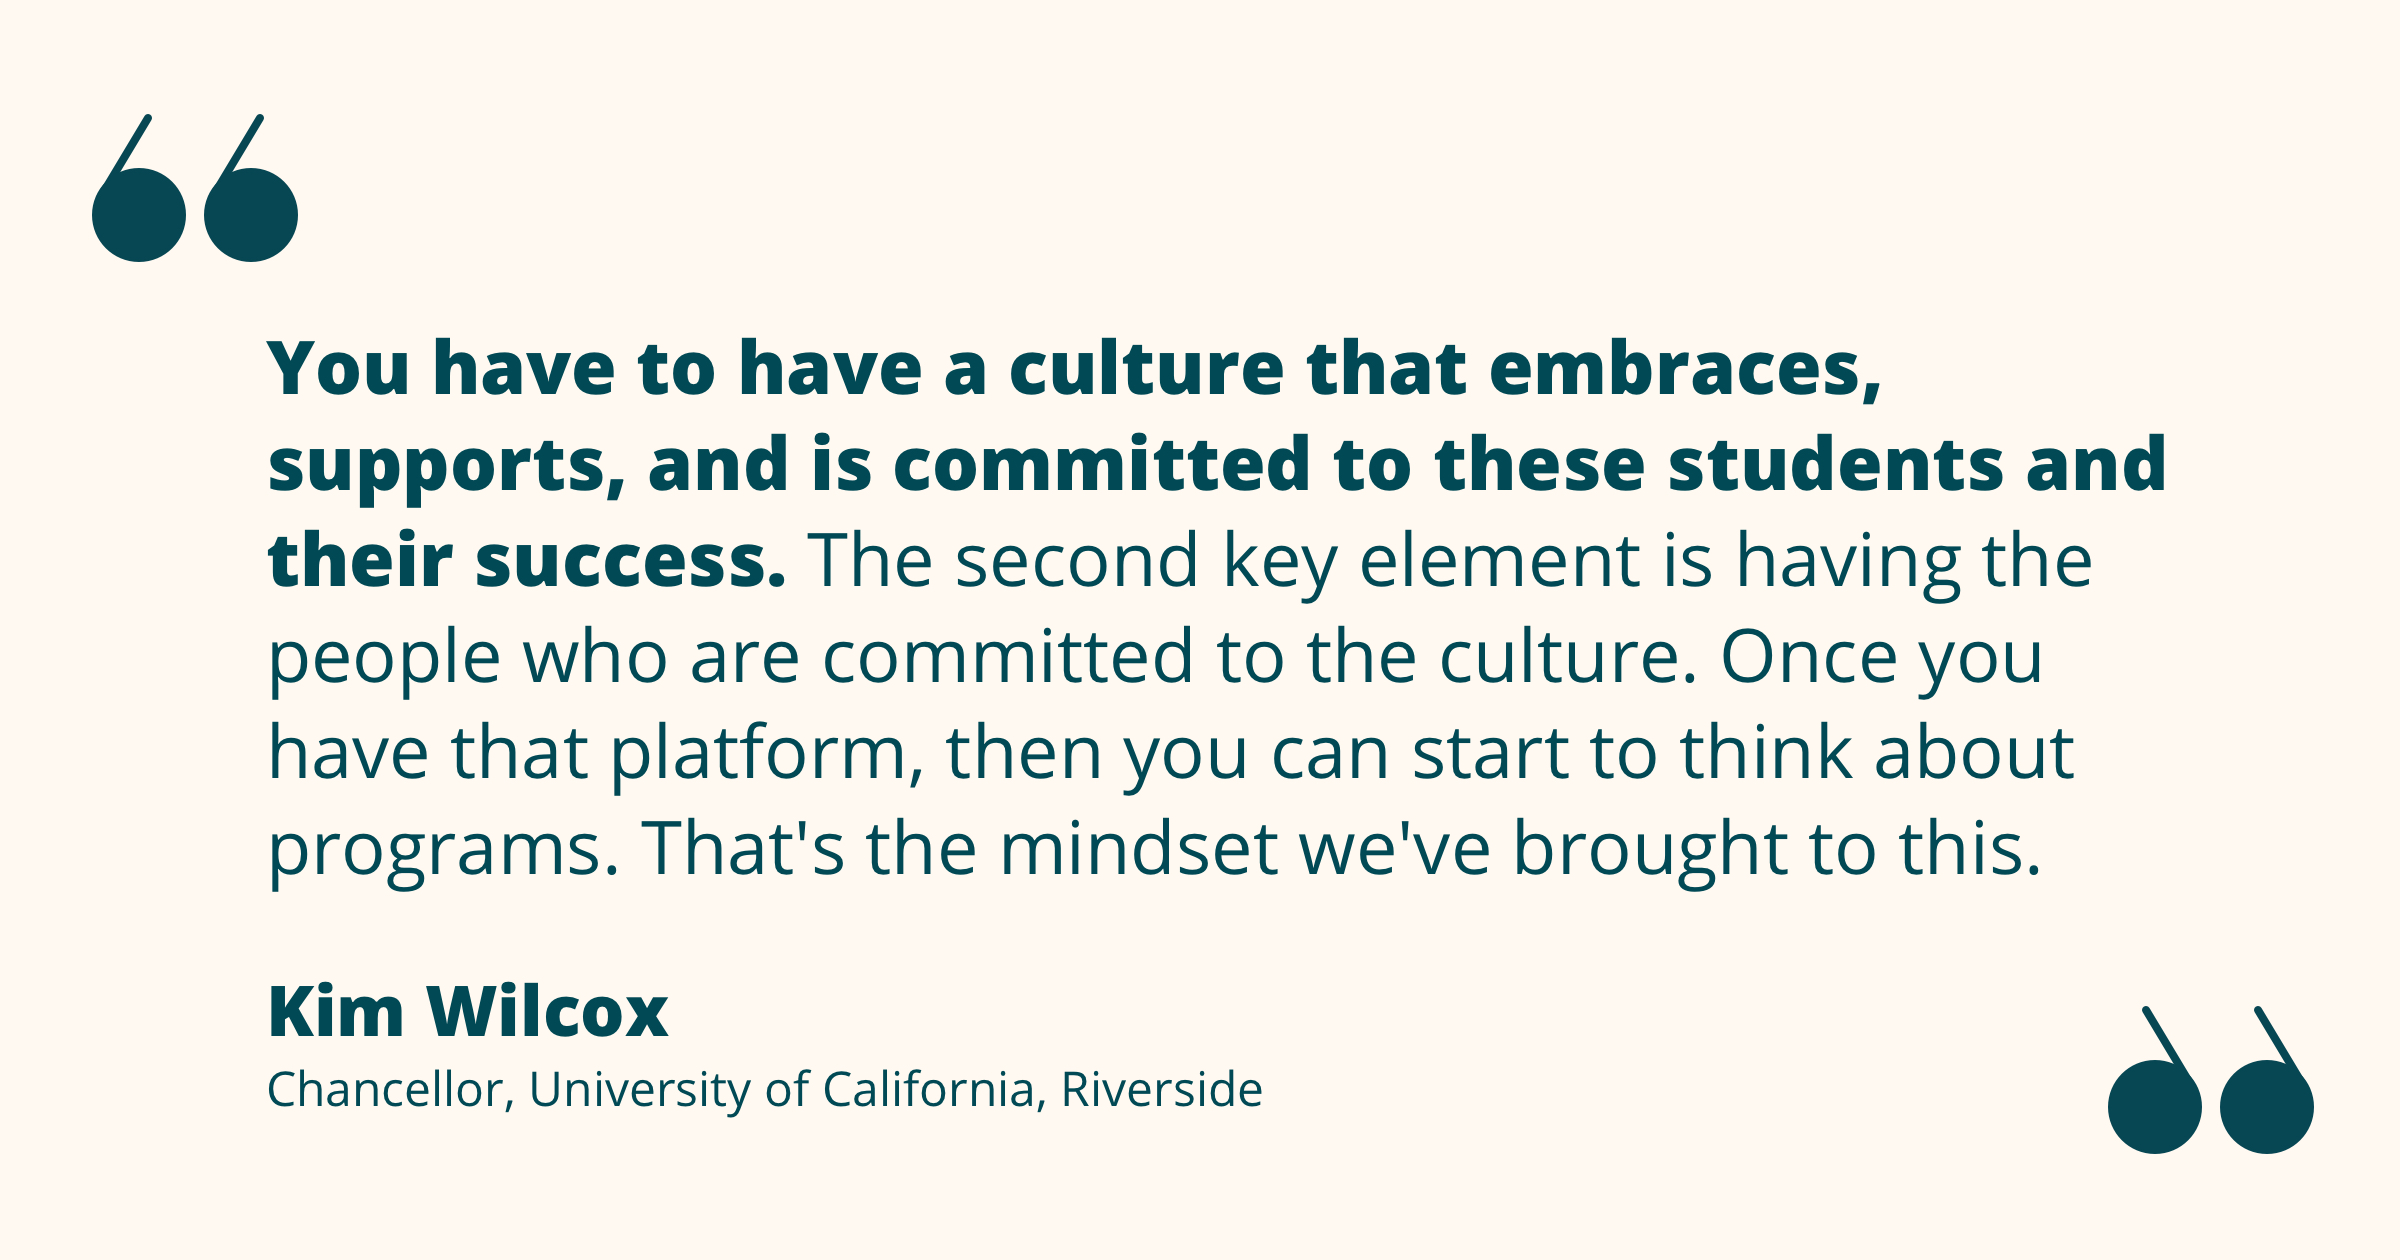 Quote by Kim Wilcox re: the need for supportive campus culture, and faculty and staff who are committed to the culture.